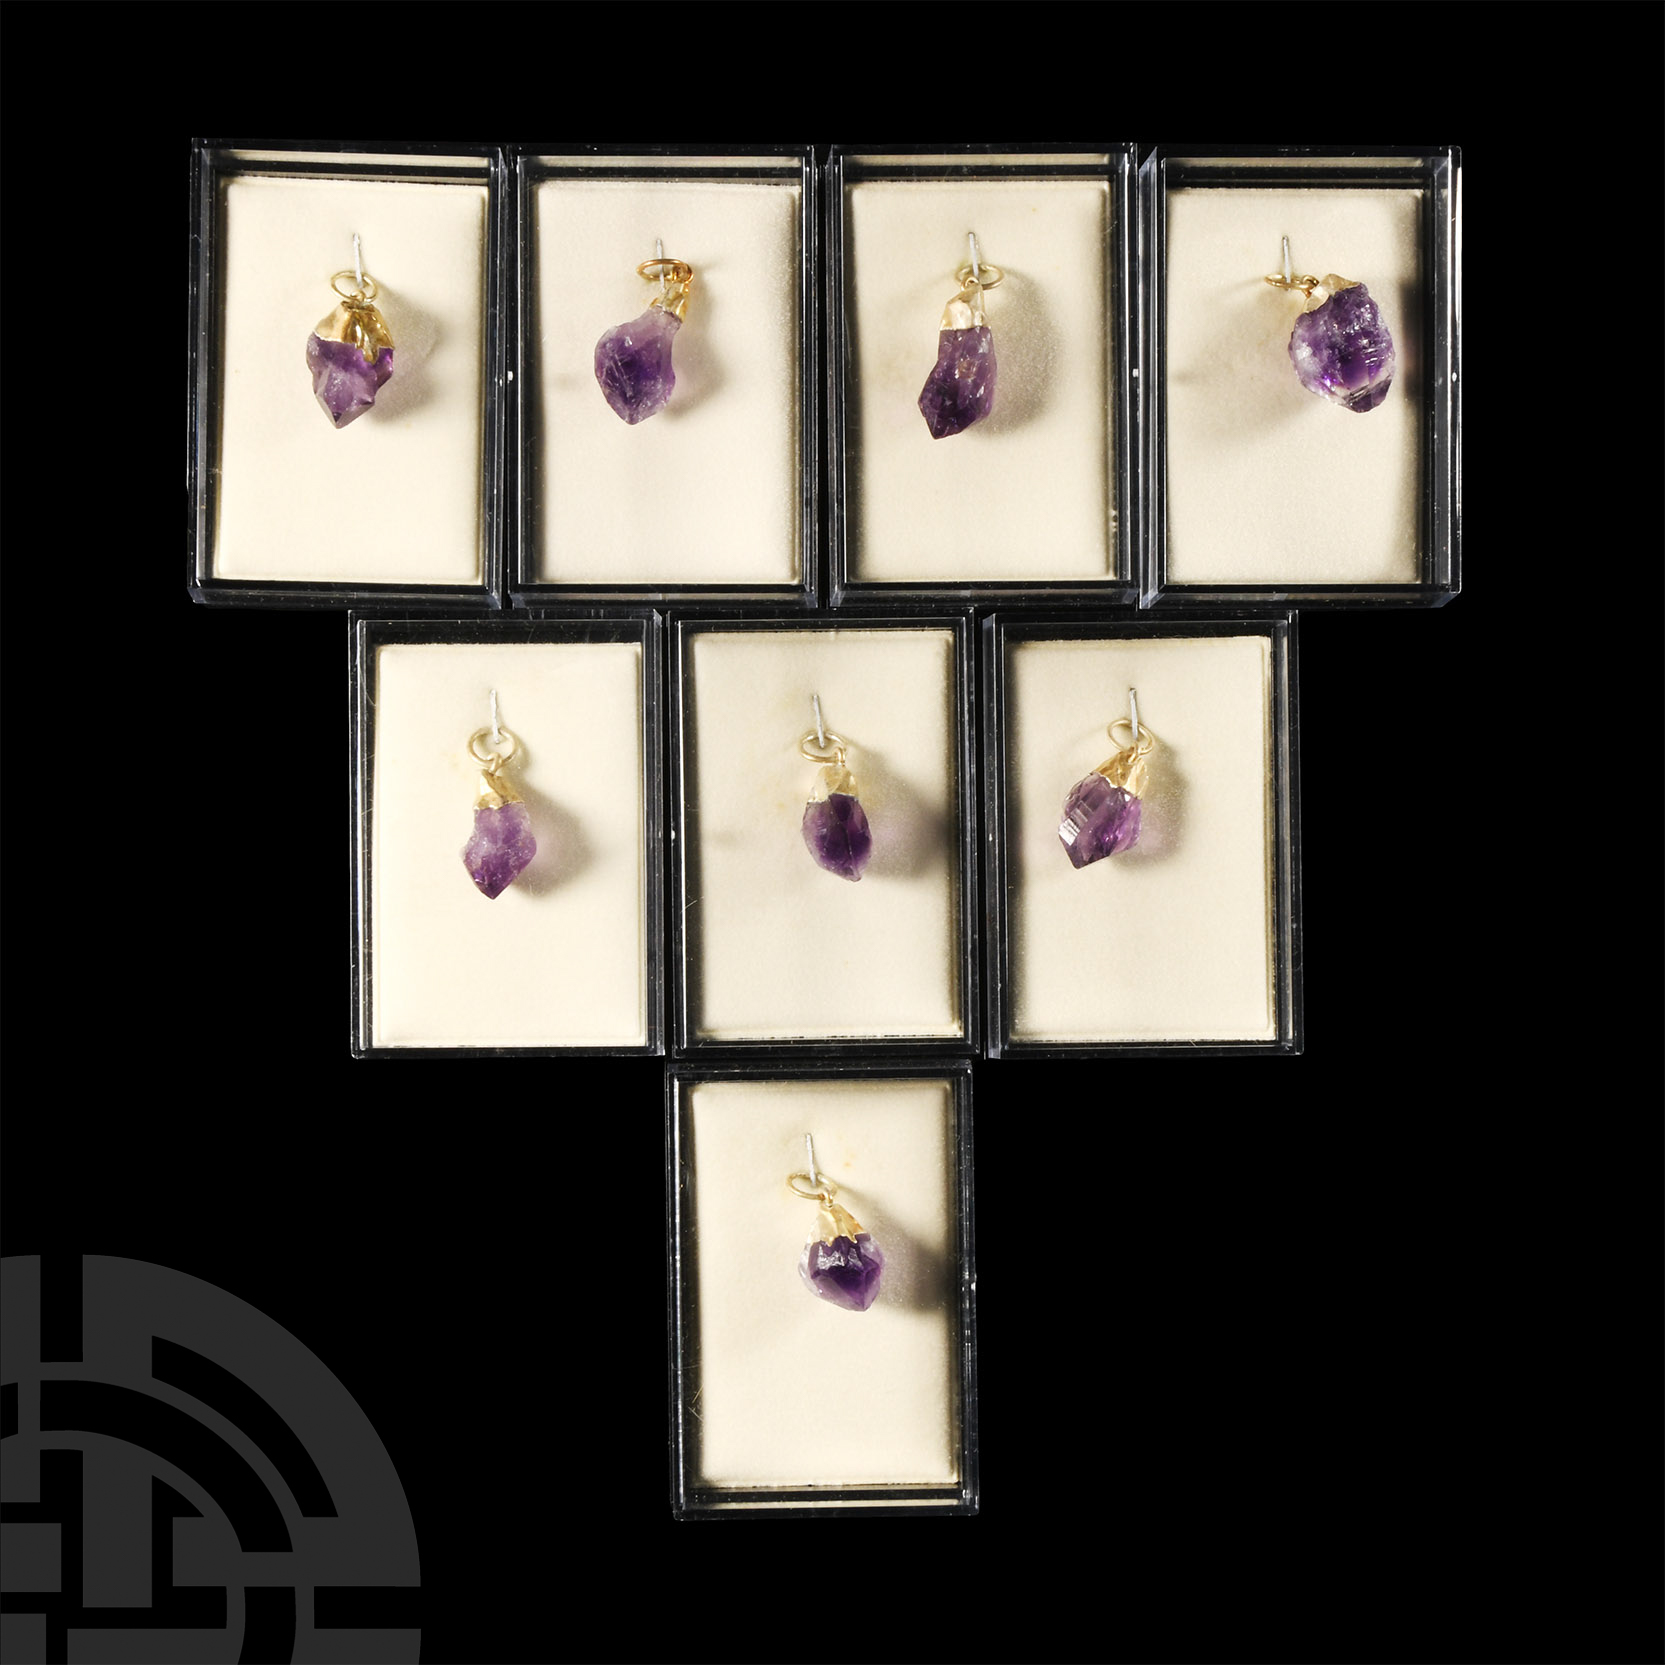 Natural History - Cased Amethyst Crystal Pendant Group [8].